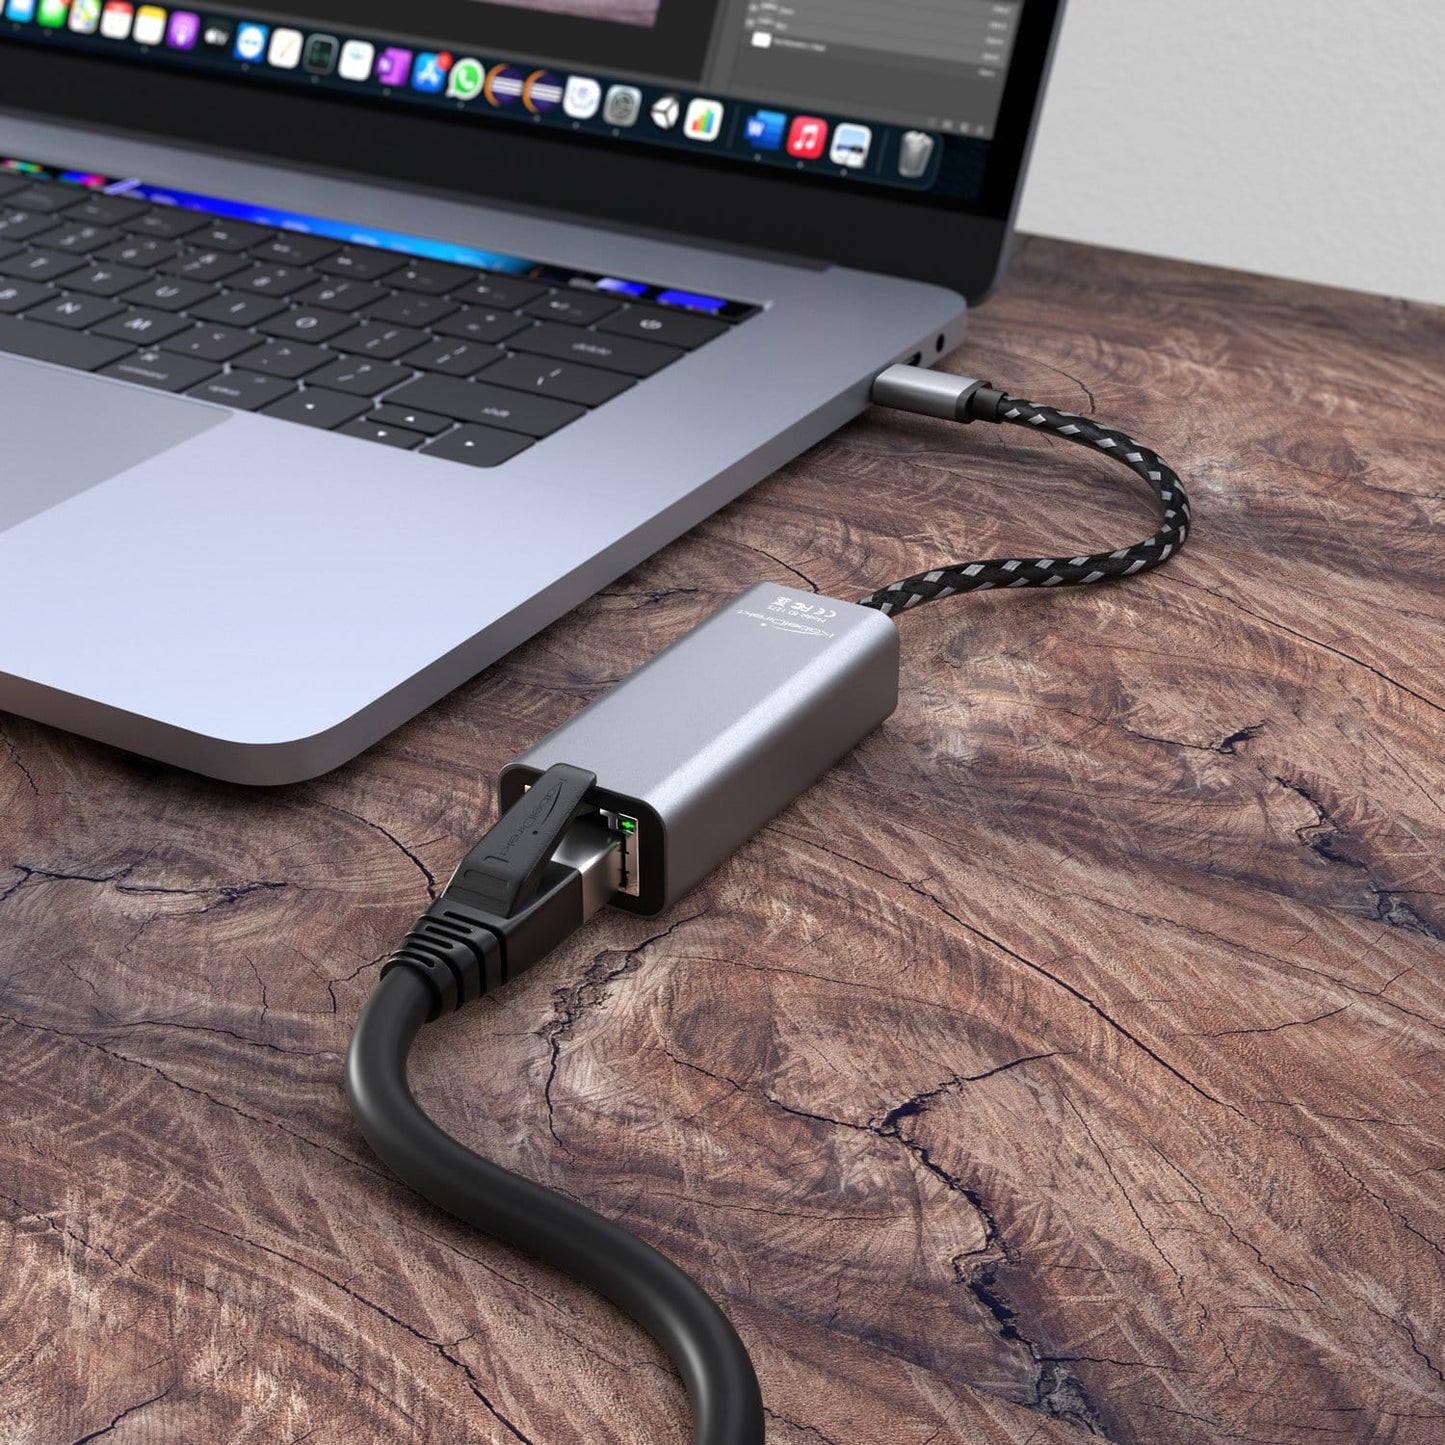 USB-C Ethernet Adapter - For connecting network cables to devices with a USB-C port, 1 Gbps